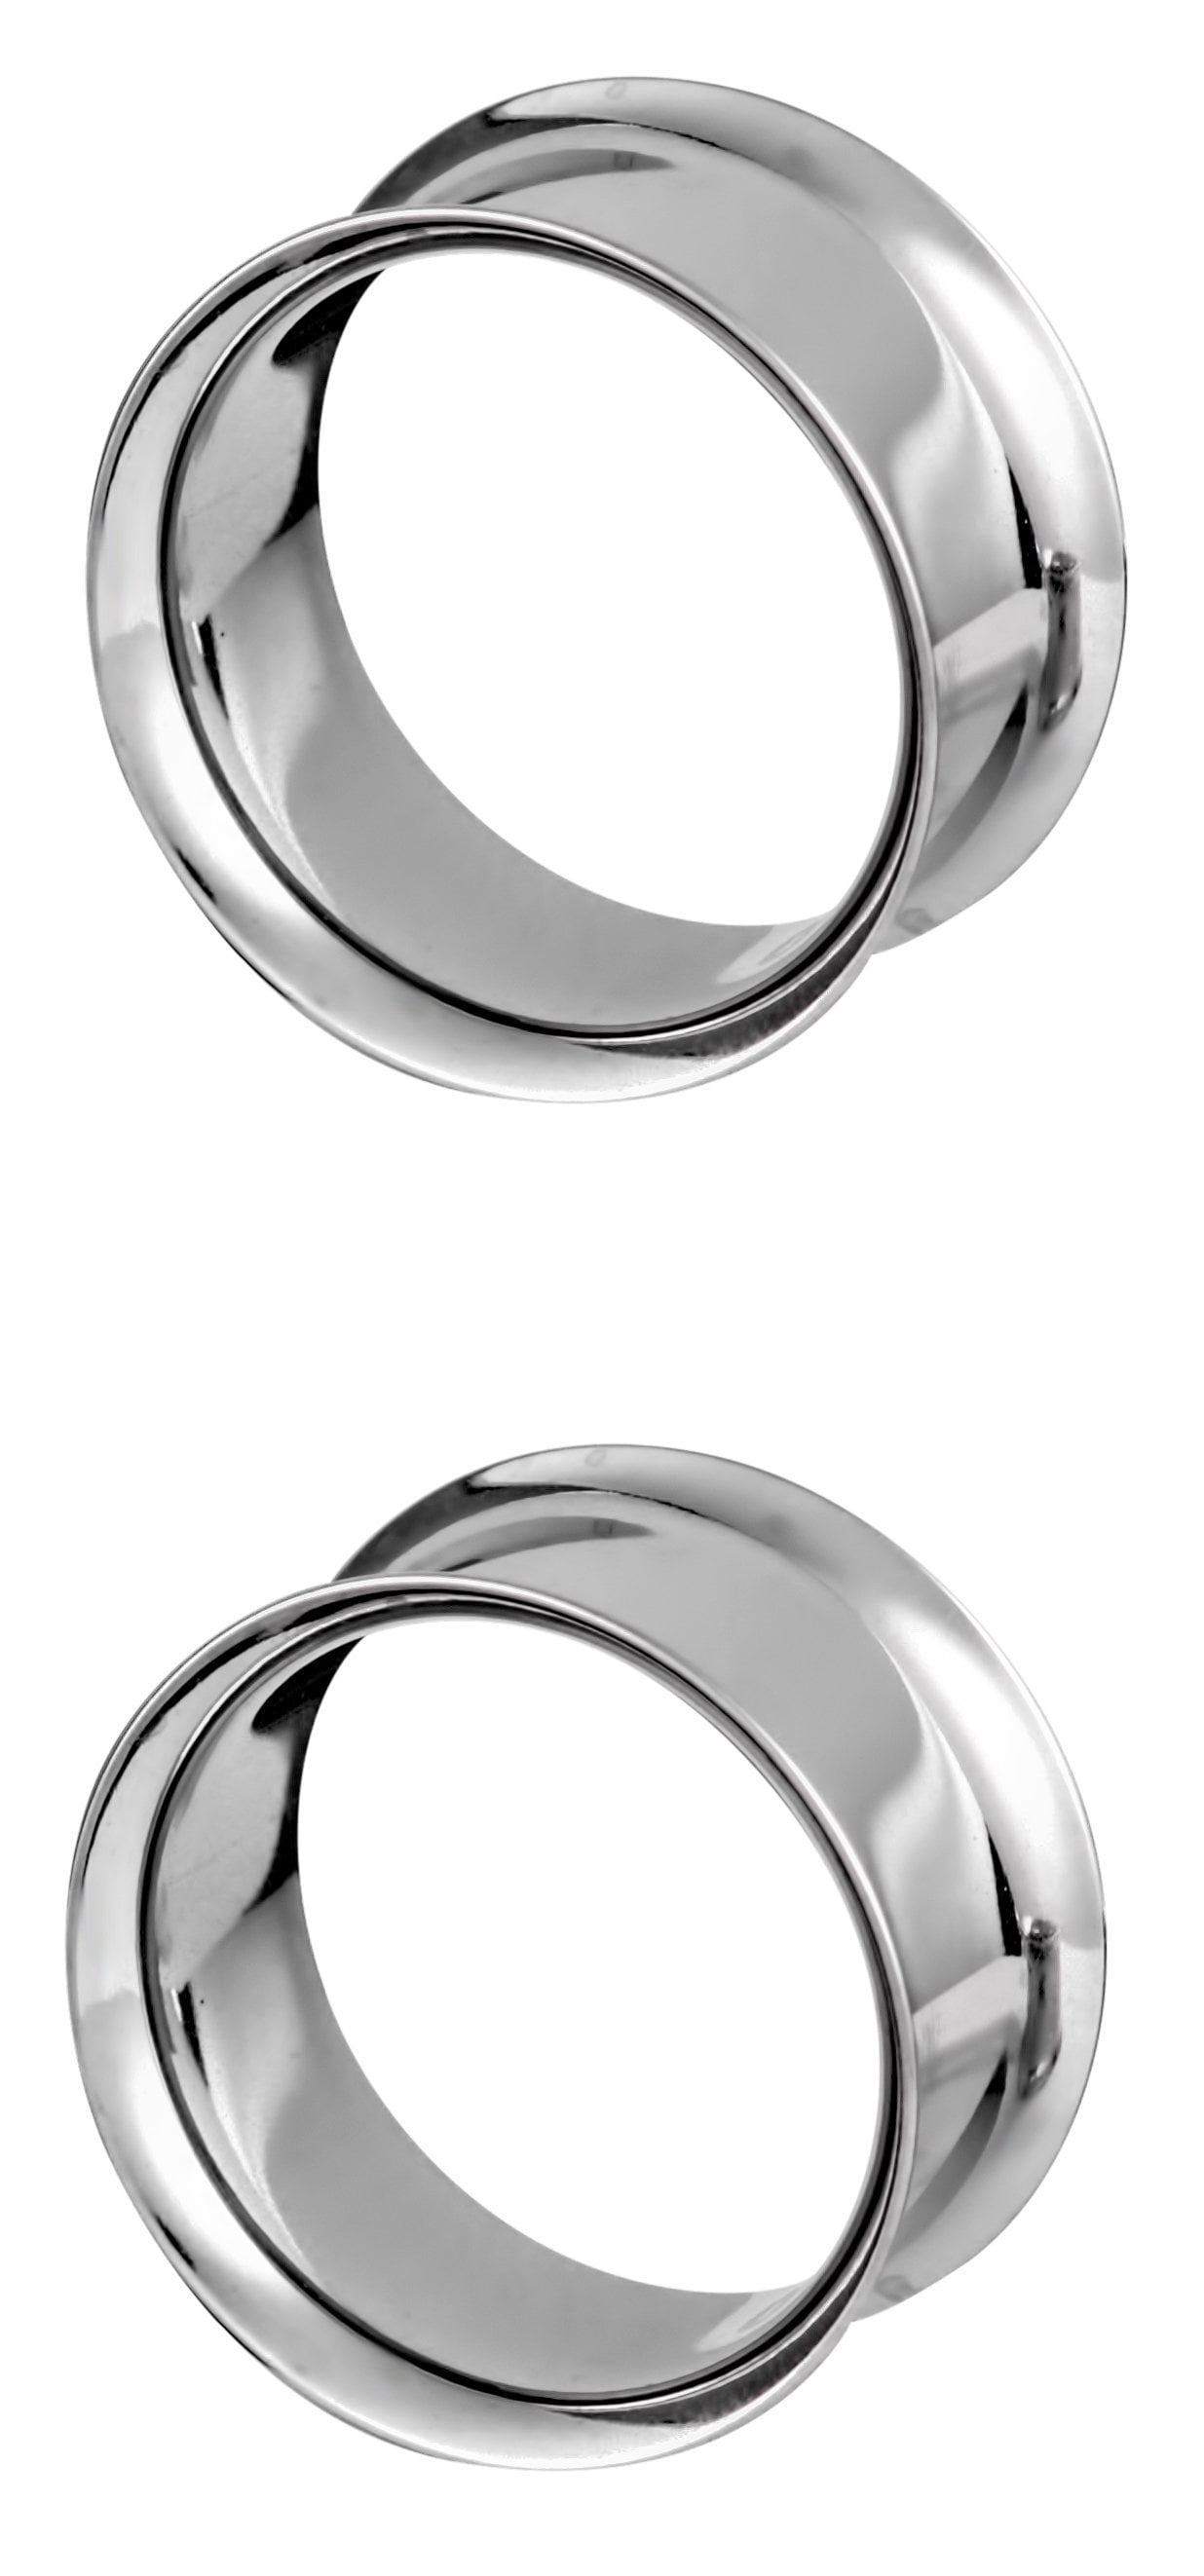 Forbidden Body Jewelry 12G-2 Inch Surgical Steel Mirror Finish Double Flared Tunnel Plug Earrings Pairs 